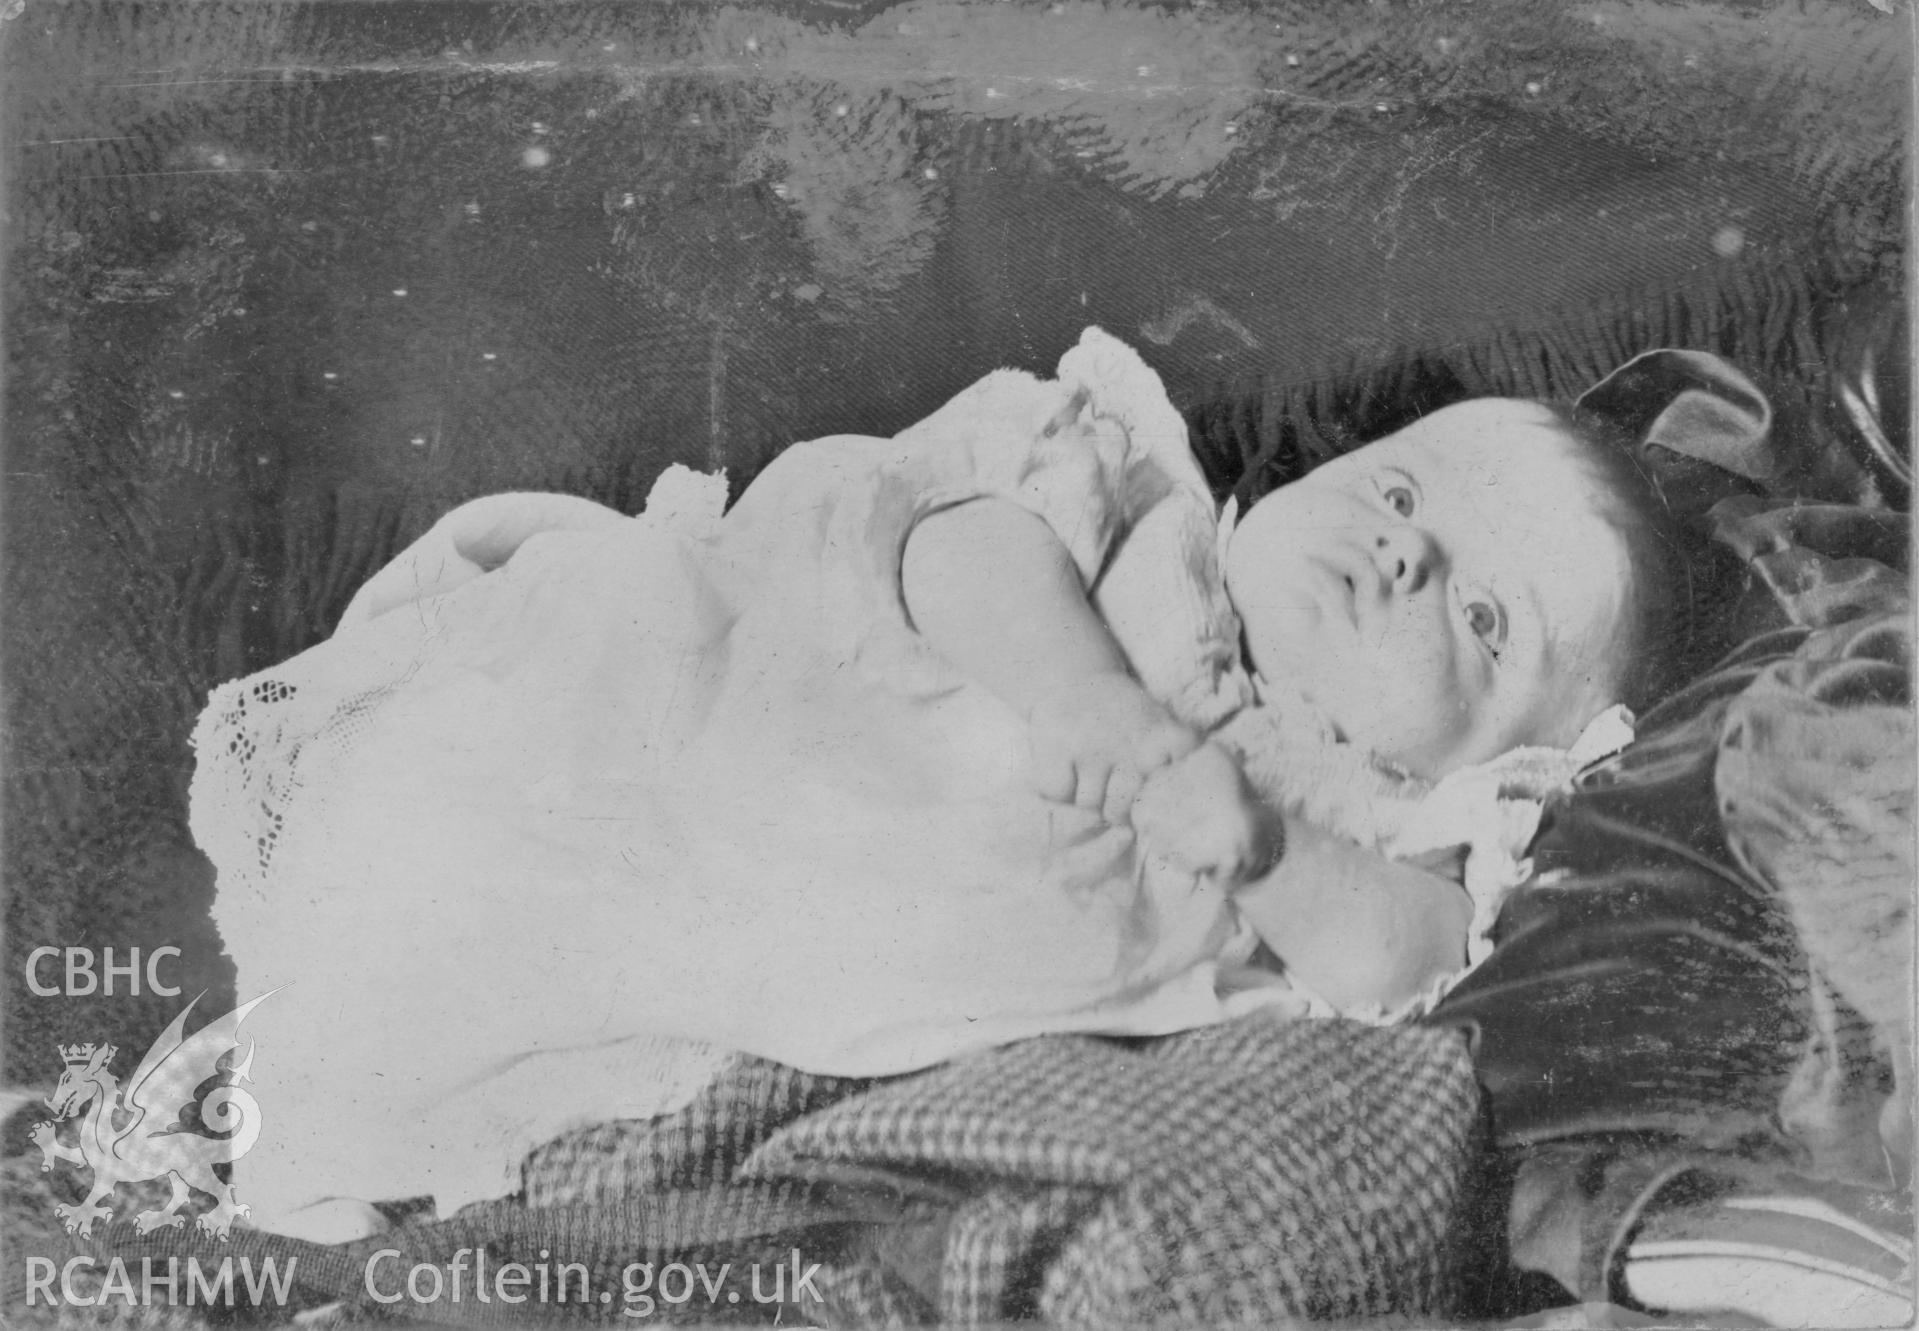 "G. at Eirianfa 1905". Photo of a baby. Digitised from a photograph album showing views of Aberystwyth and District, produced by David John Saer, school teacher of Aberystwyth. Loaned for copying by Dr Alan Chamberlain.